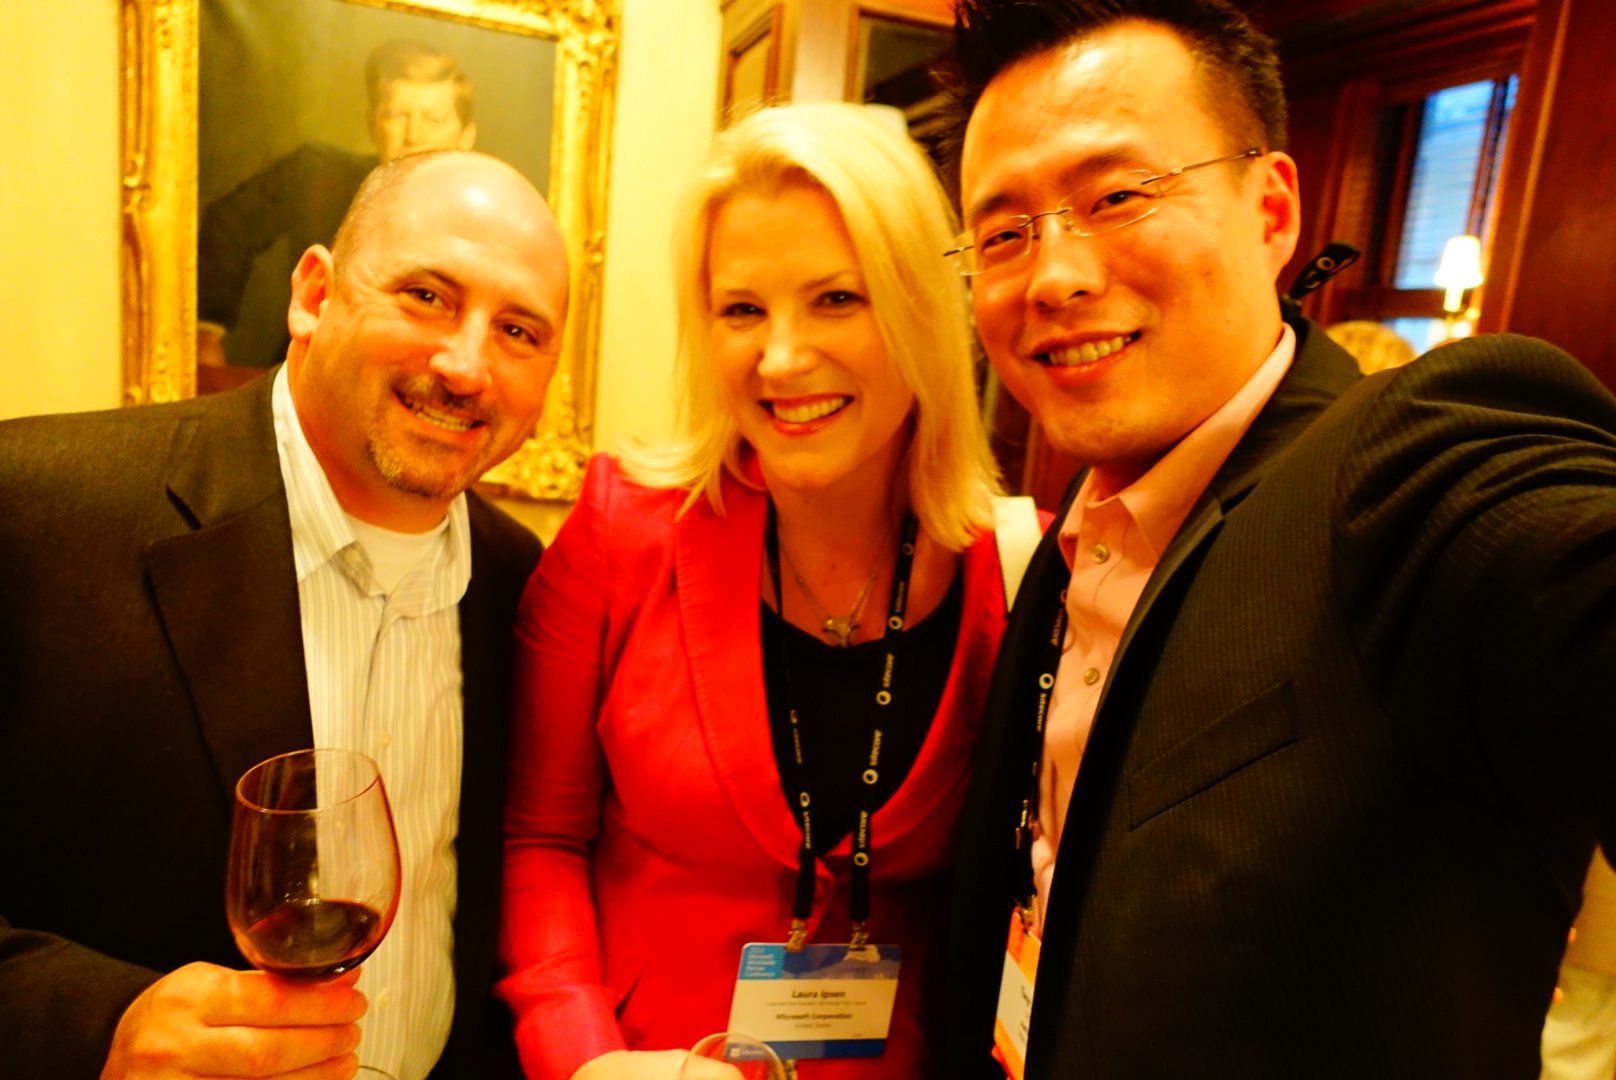 TJ at the Microsoft CityNext partner event with Microsoft General Manager of Worldwide Government Joel Cherkis and Microsoft Corporate Vice President of Worldwide Public Sector Laura Ipsen.